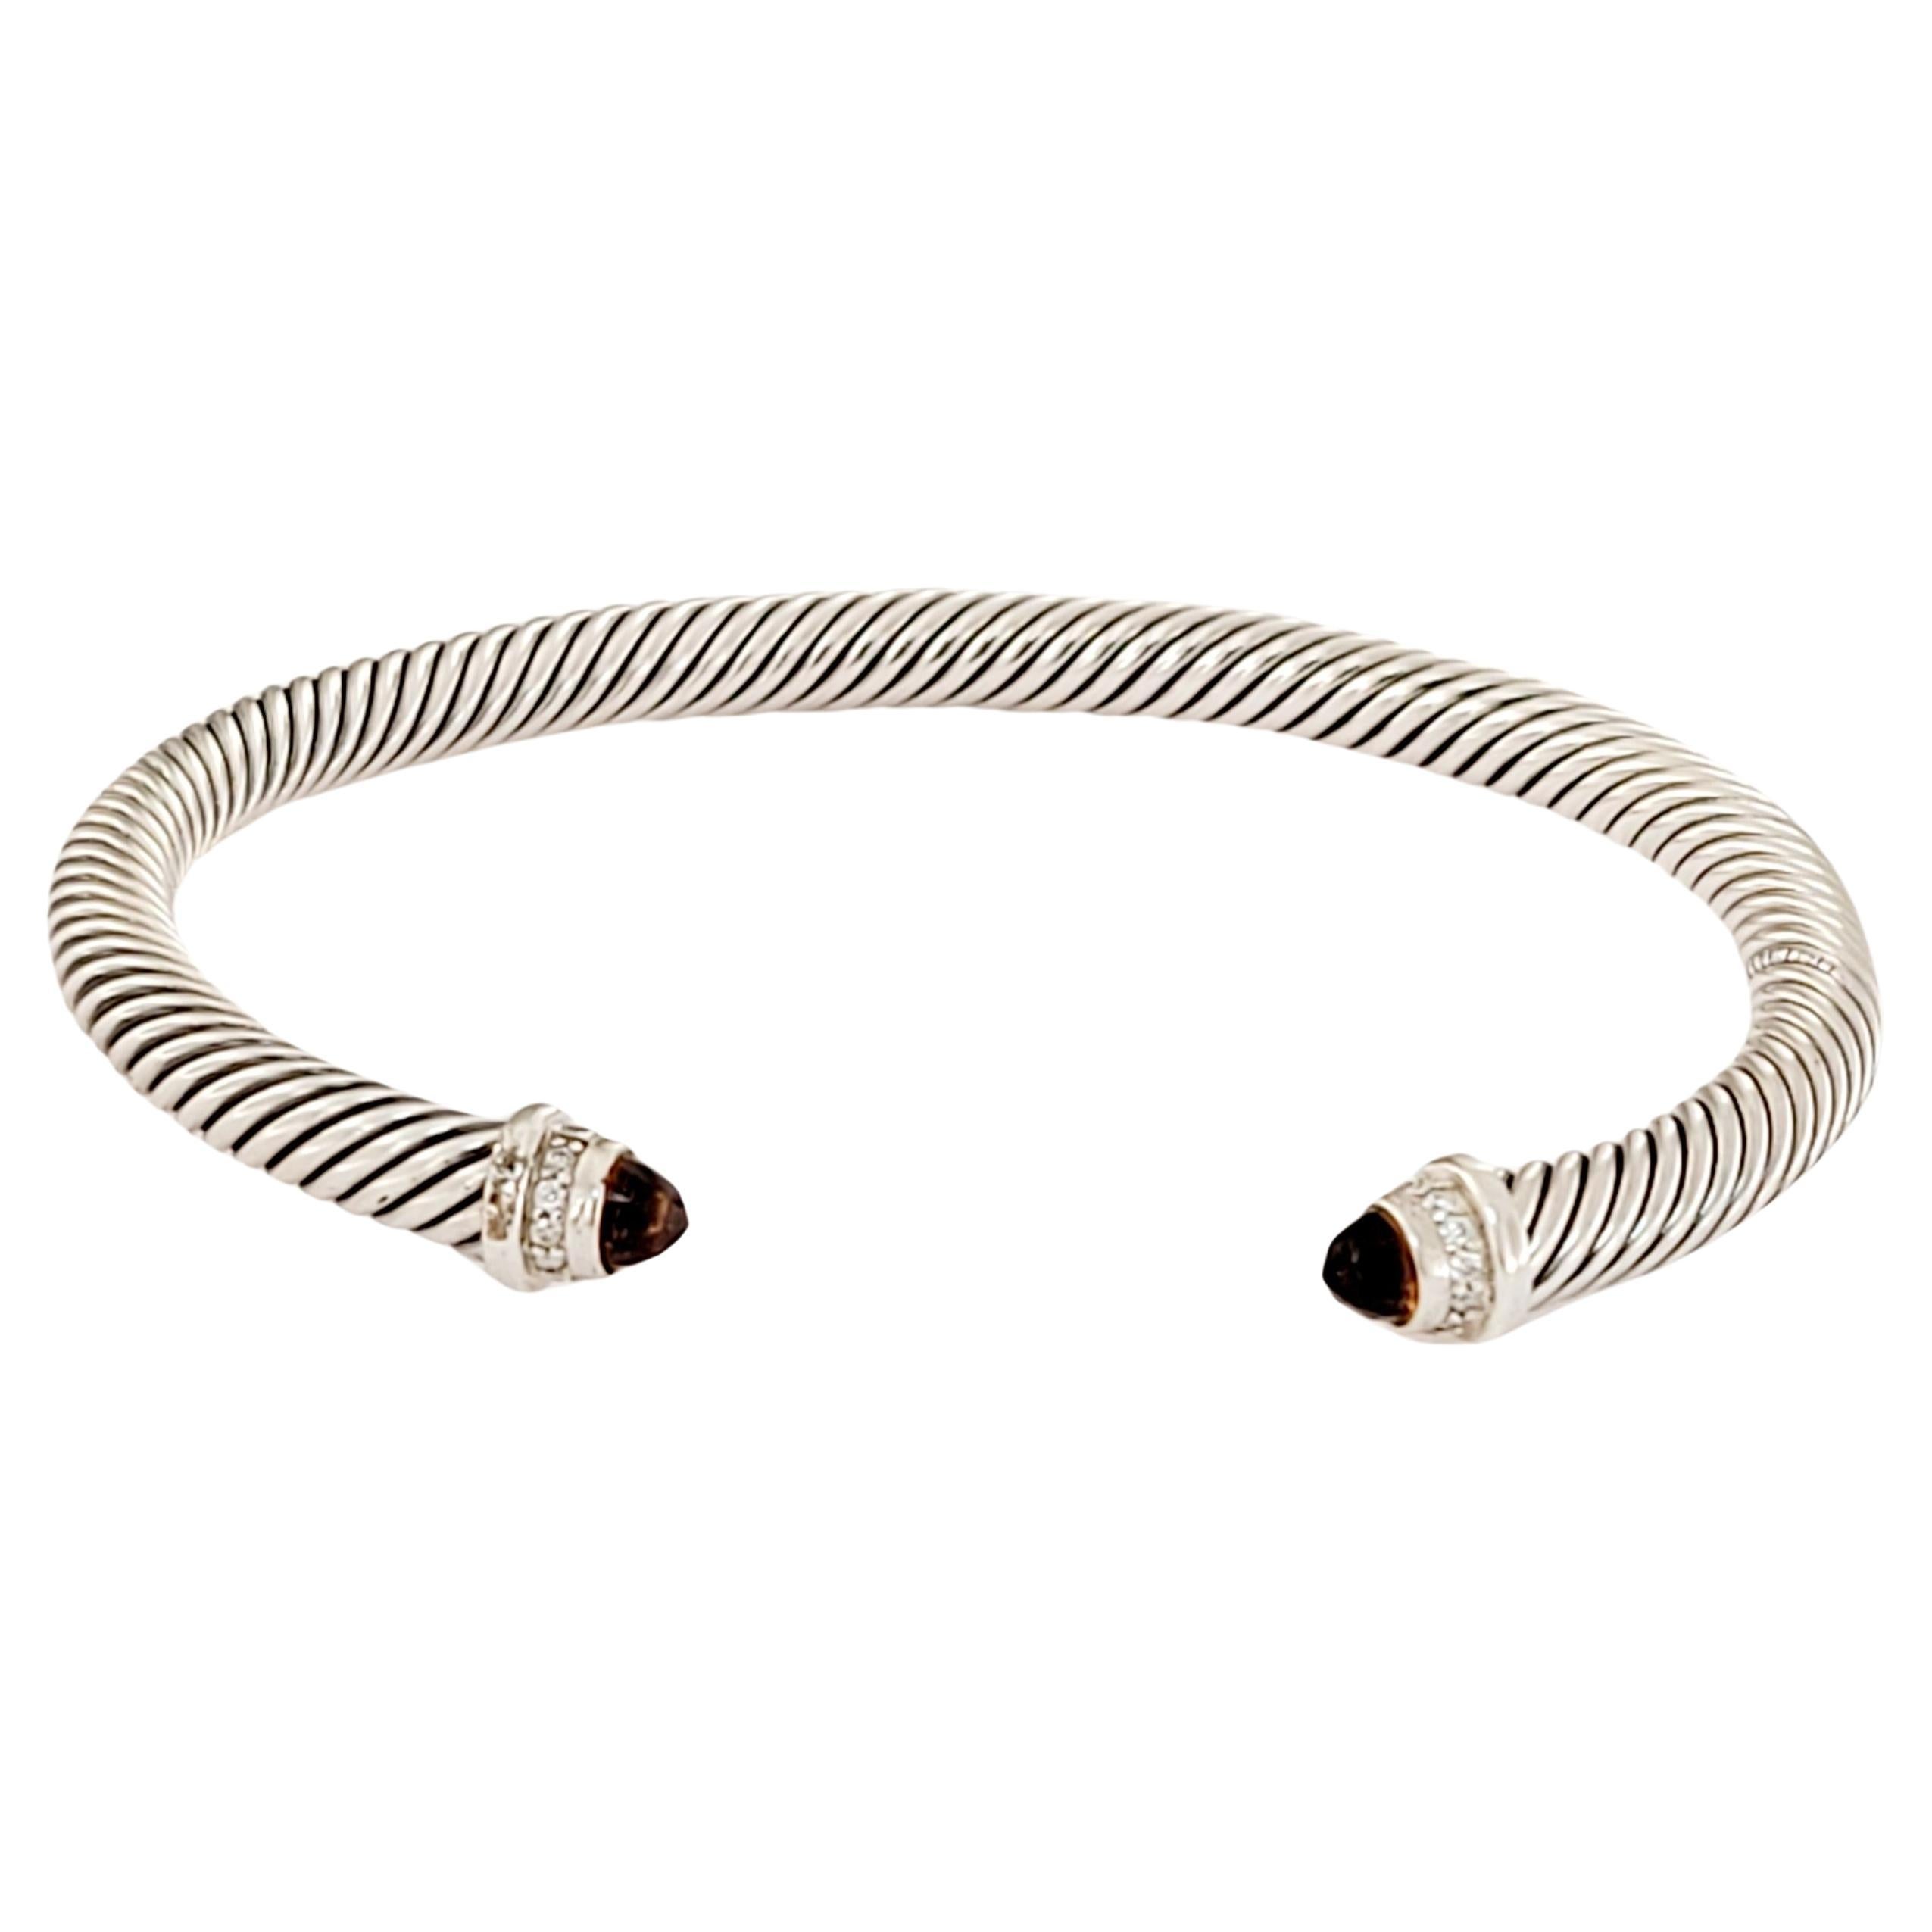 David Yurman Cable Bracelet in 18k Gold with Citrine and Diamonds, 7mm |  REEDS Jewelers